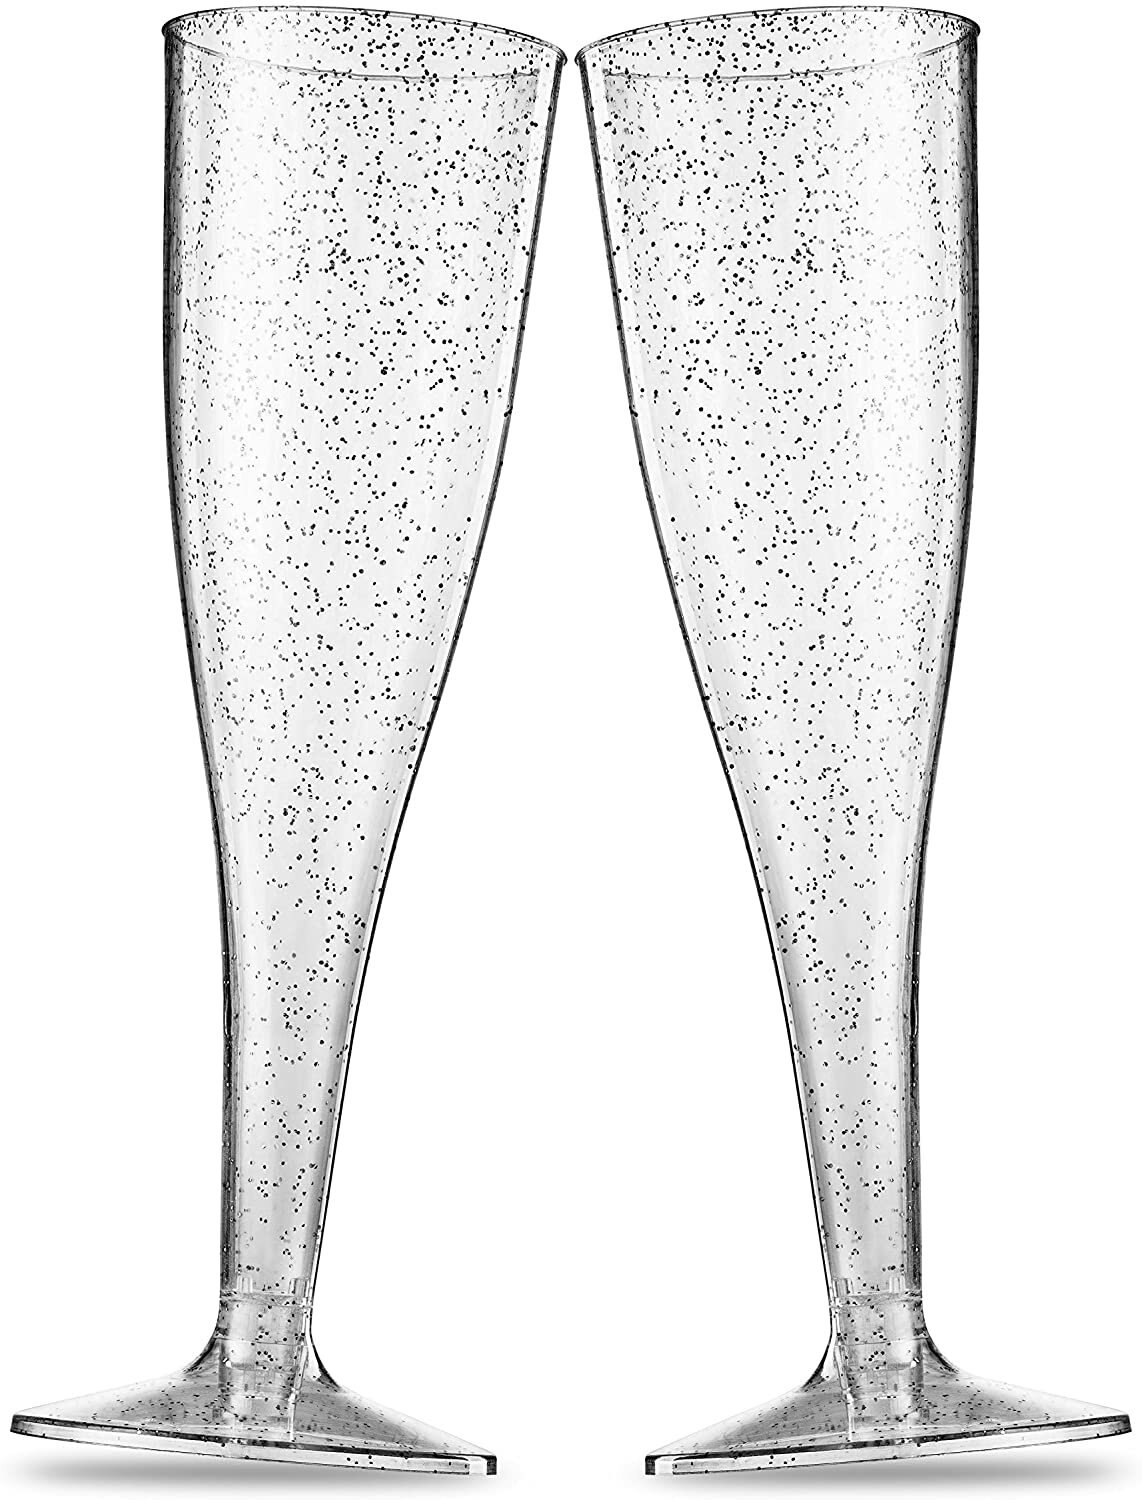 4-oz White Plastic Champagne Flute Perfect for Weddings Catered Events and Bars One Piece Design 100-ct Restaurantware